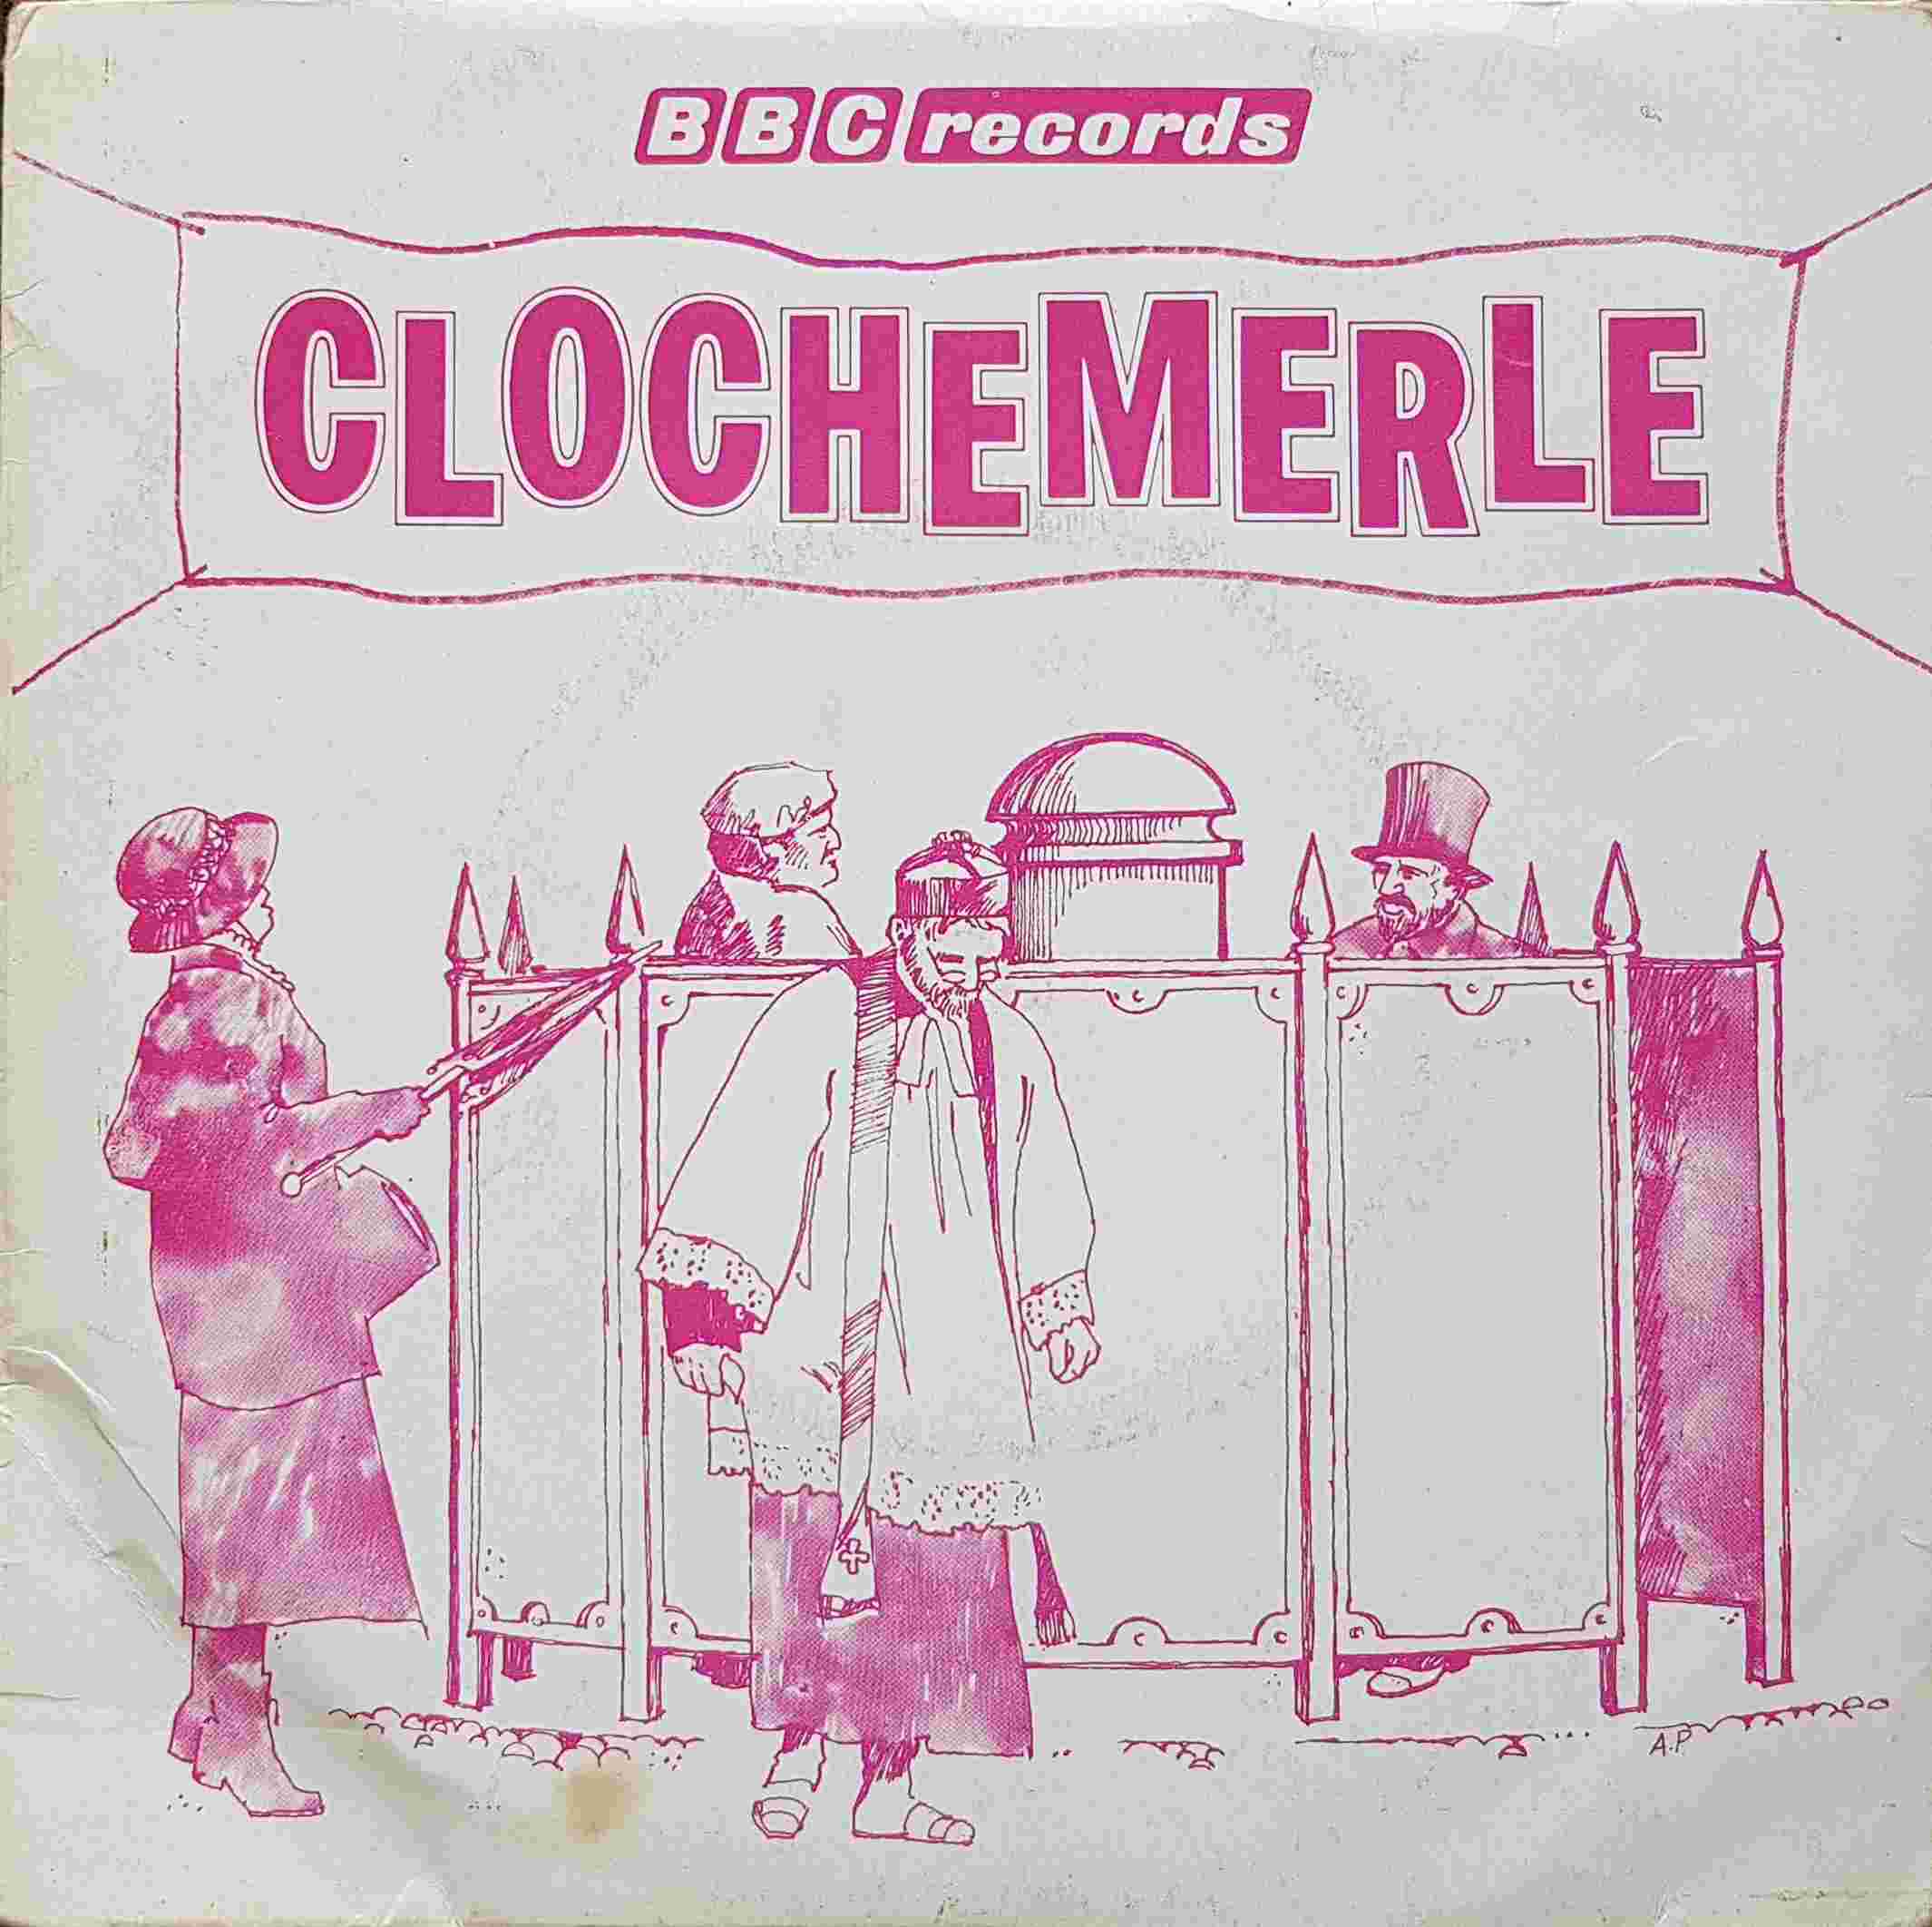 Picture of RESL 8 Clochemerle by artist Alan Roper from the BBC records and Tapes library